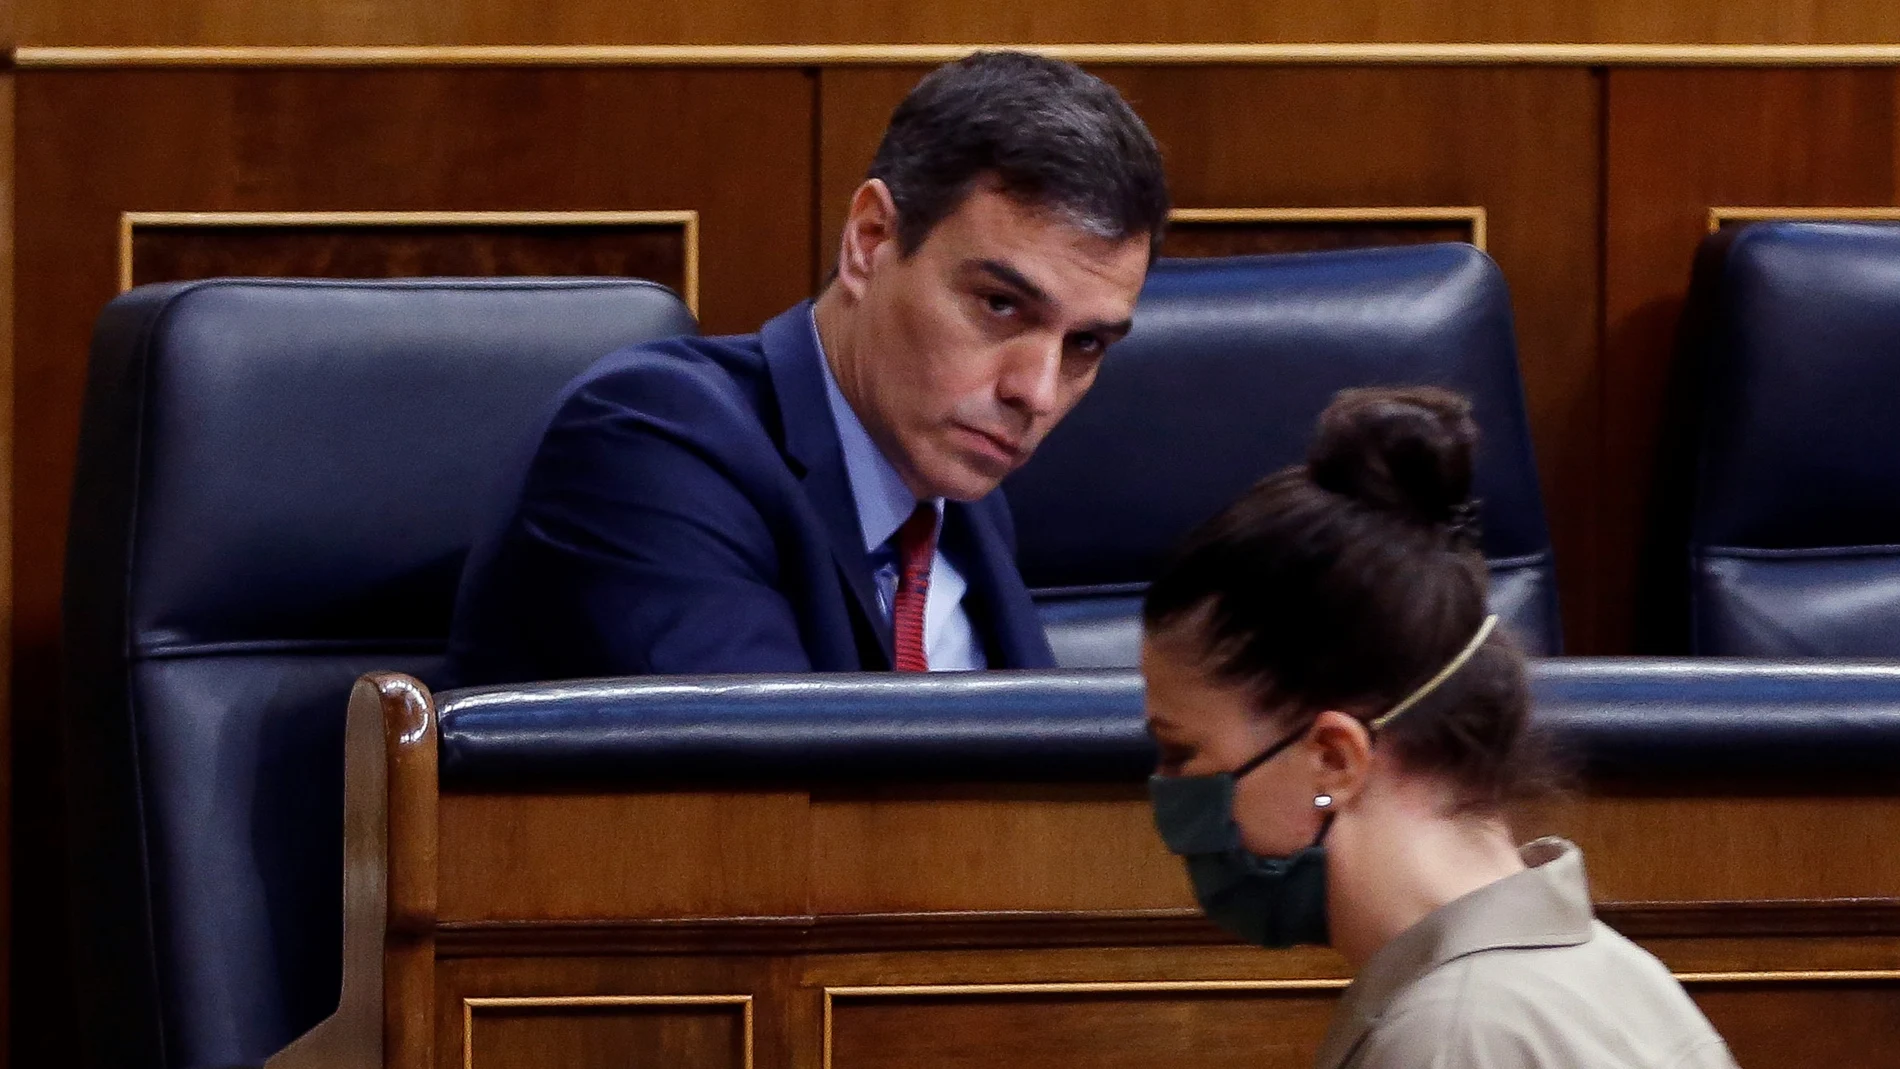 Spain's Prime Minister, Pedro Sanchez looks at far-right Vox party's deputy Macarena Olona wearing a mask to protect against coronavirus, during the opening of a parliamentary session in Madrid, Spain, Thursday, April 9, 2020. Sanchez acknowledged that Spain's government, and its regions which administer health services, were caught off guard by the crisis and left its hospitals woefully short on critical supplies, including virus tests and protective clothing for medical workers. (Mariscal, Pool Photo via AP)